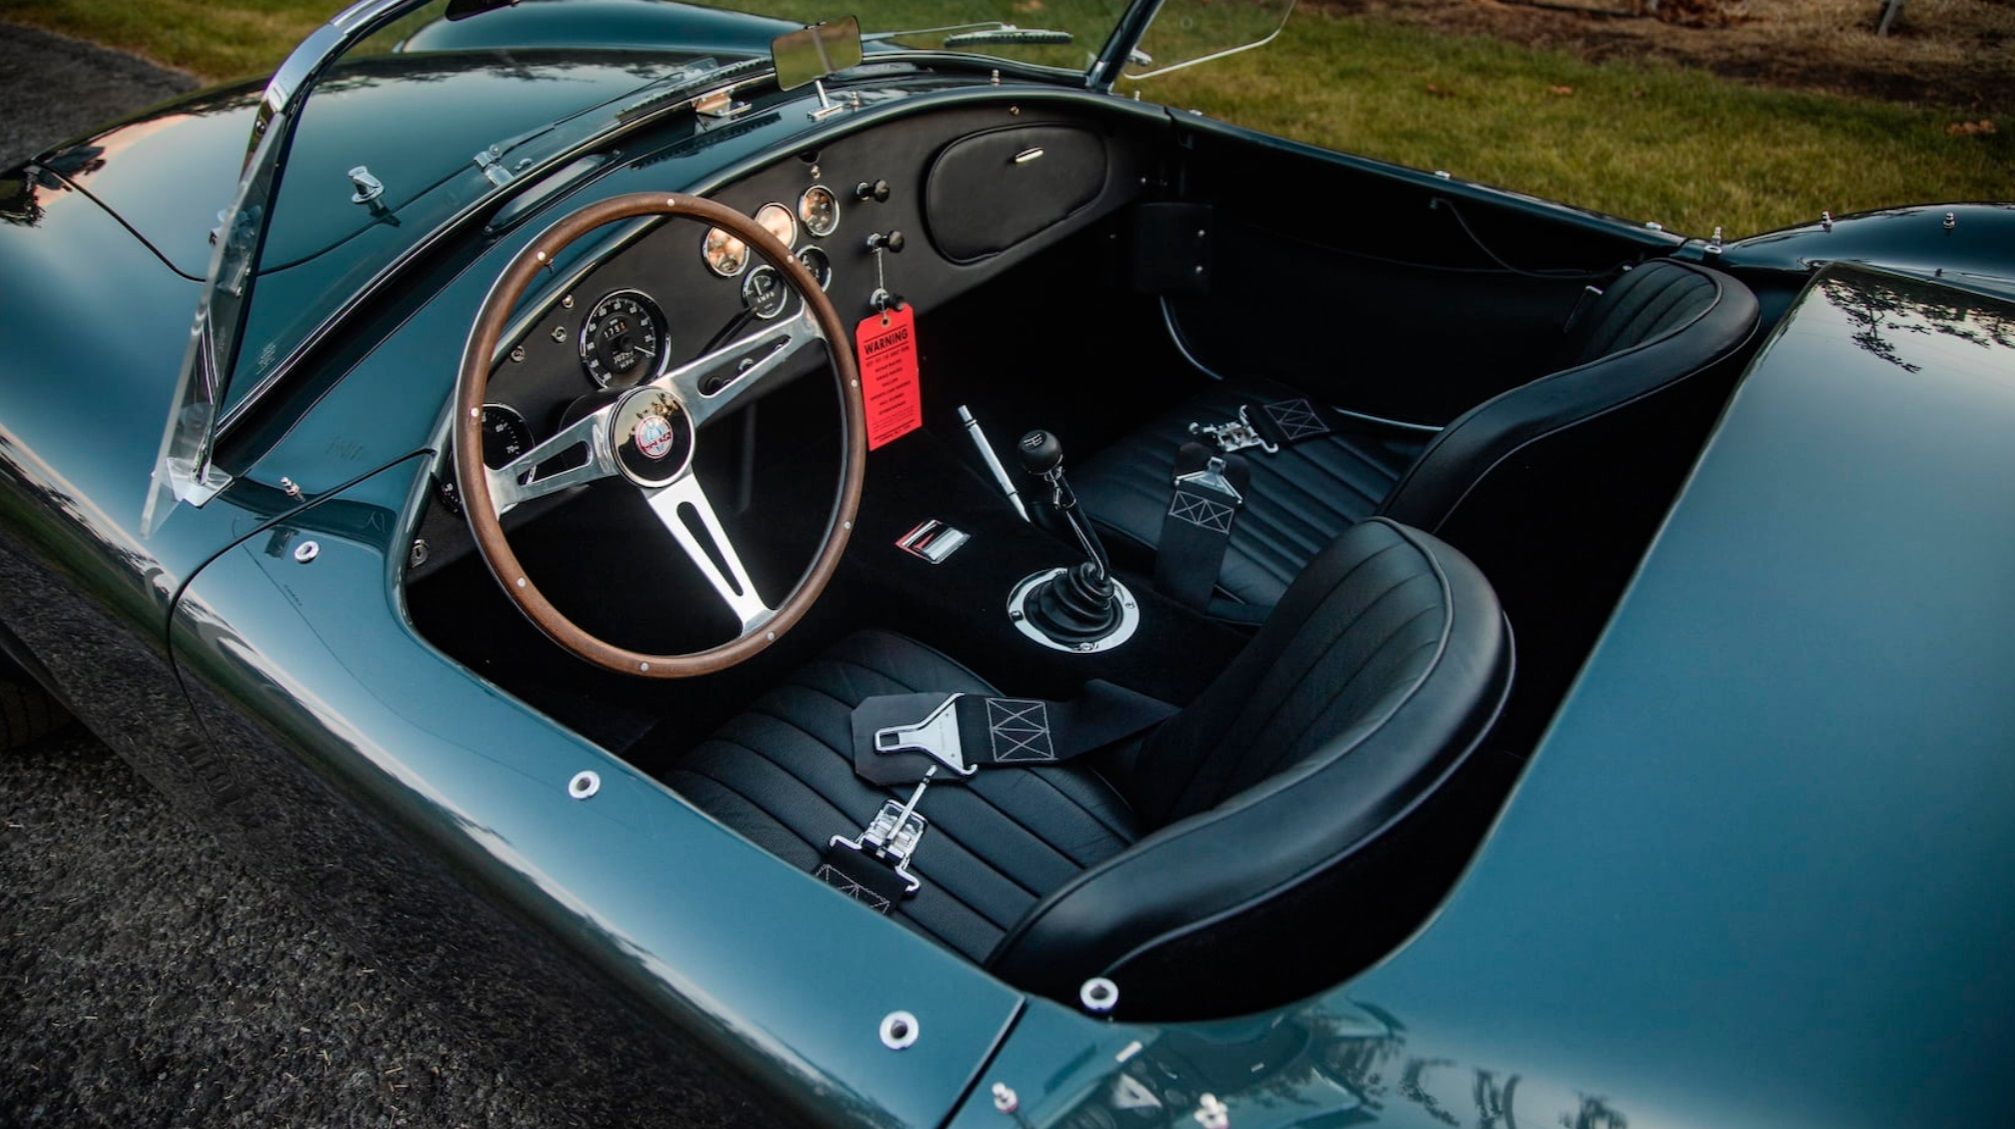 The interior of the 1965 Shelby Cobra 427 Roadster.